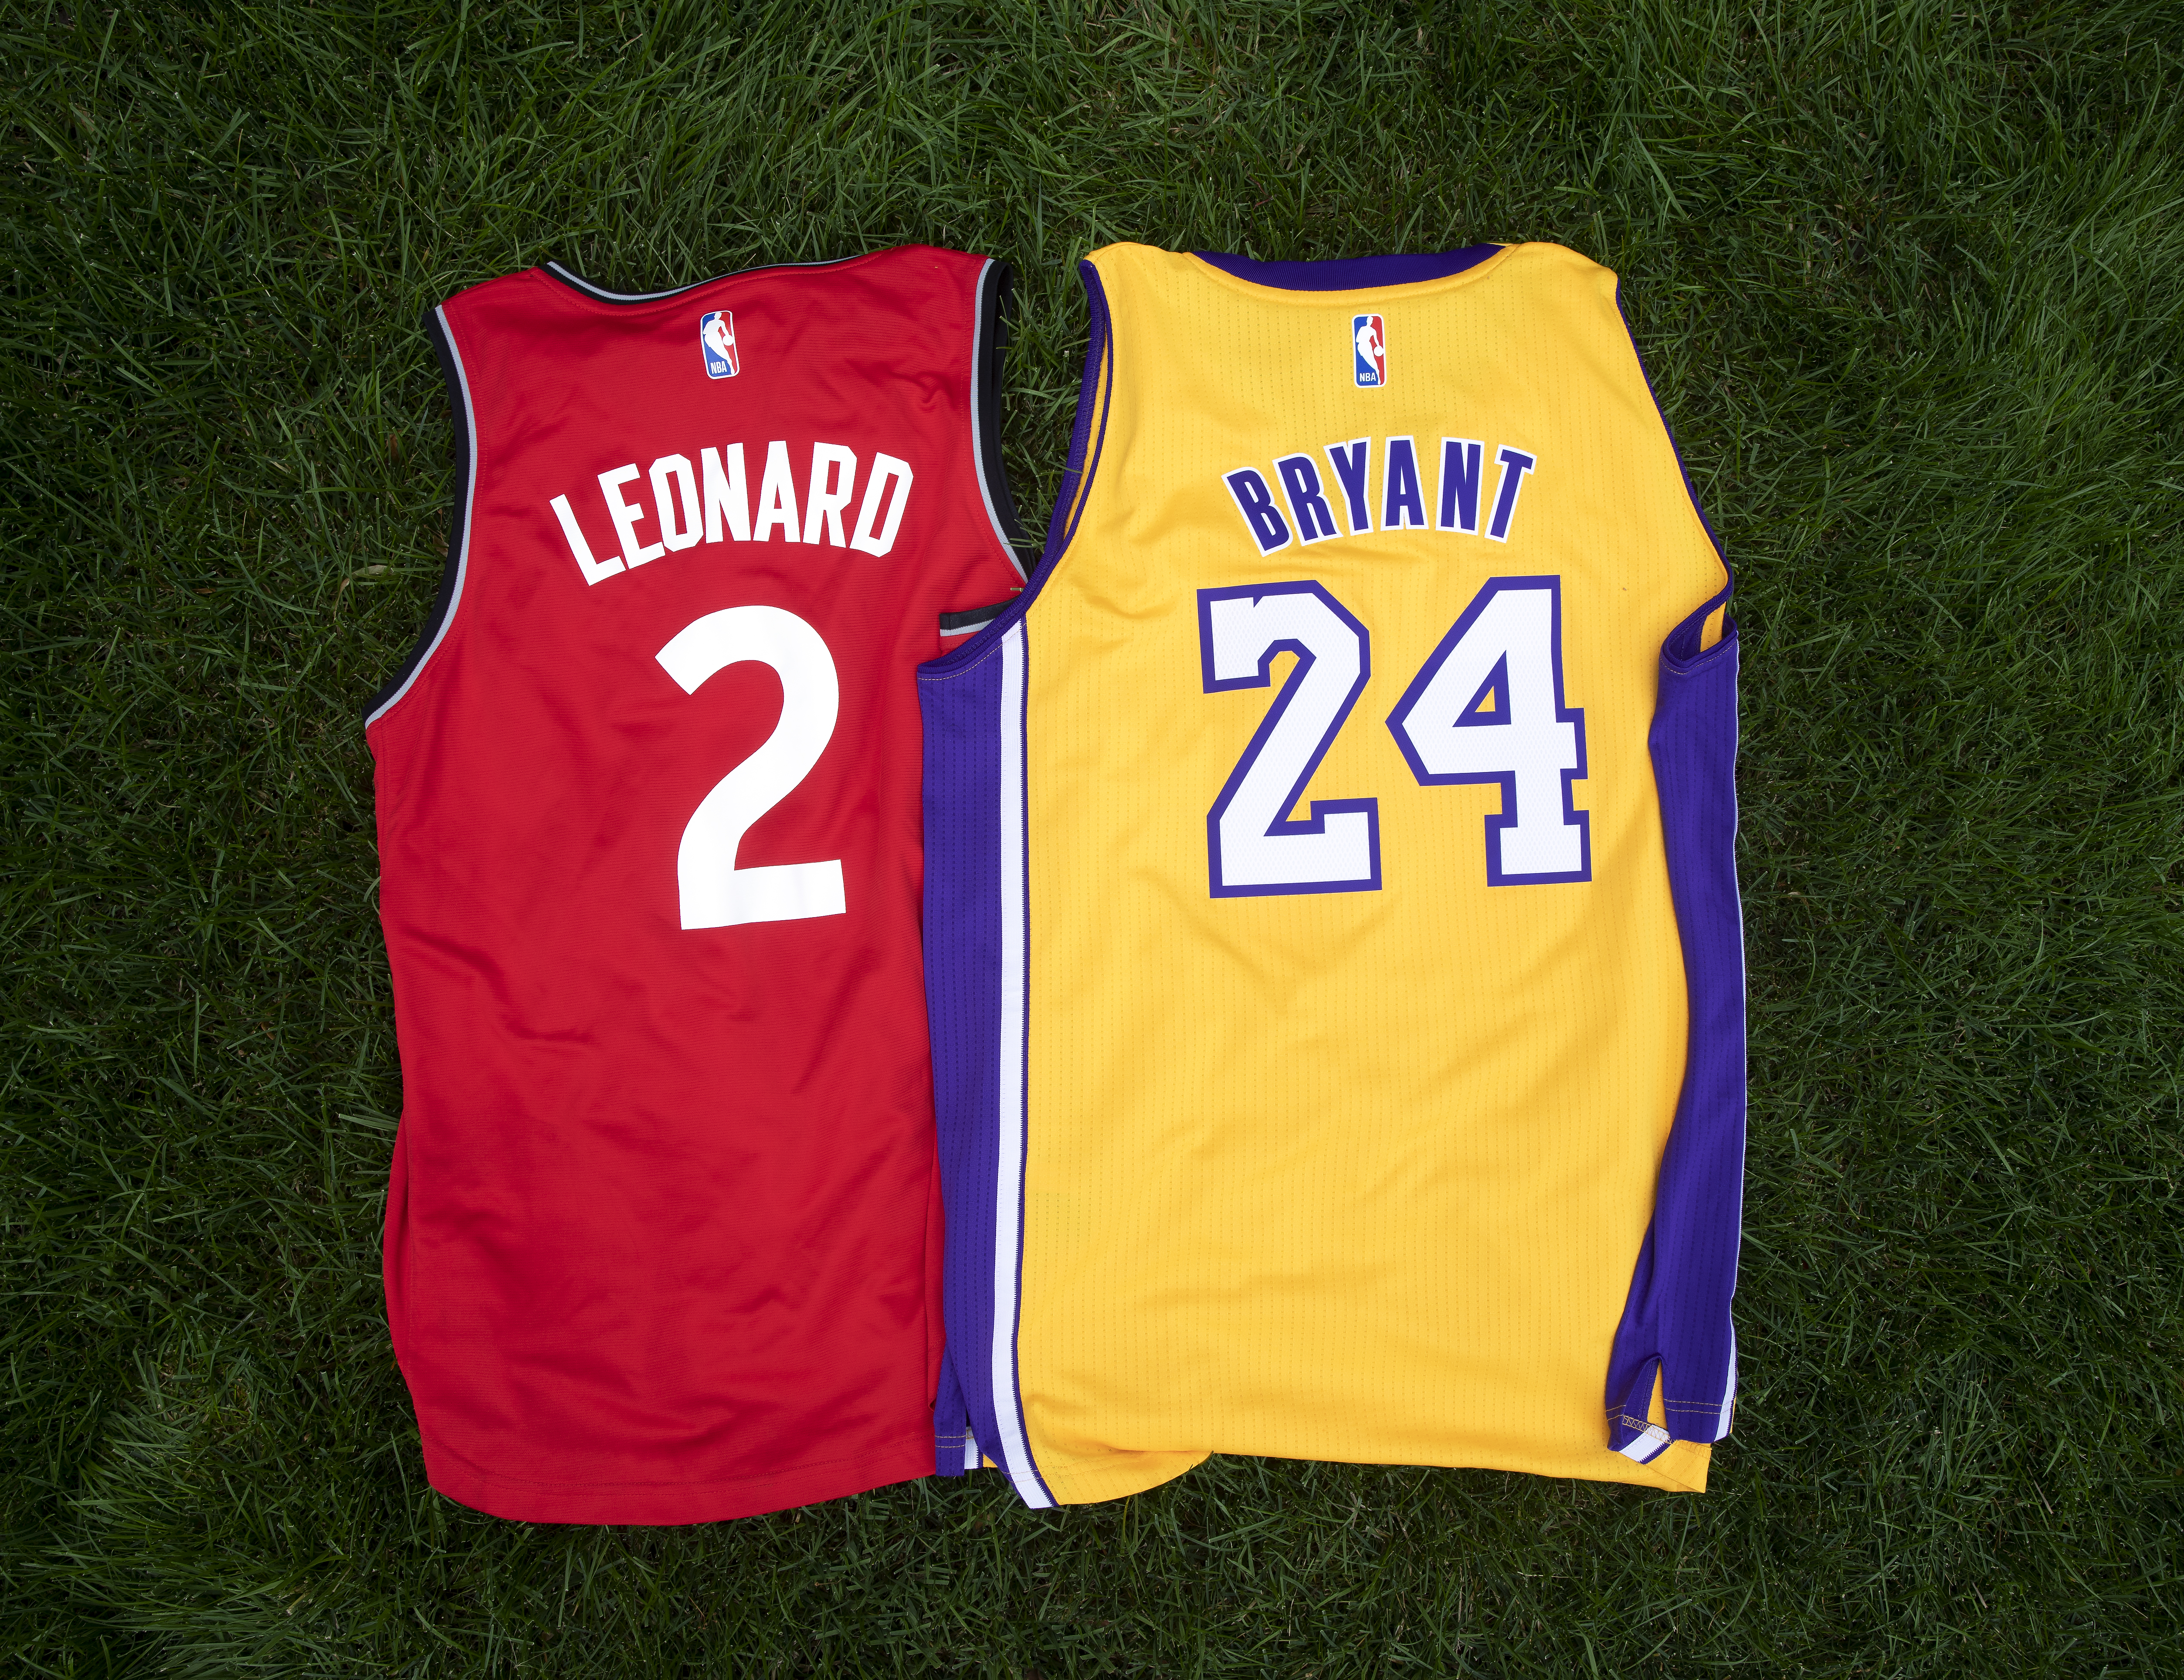 Authentic Or Knockoff Nba Jerseys The Daily Universe